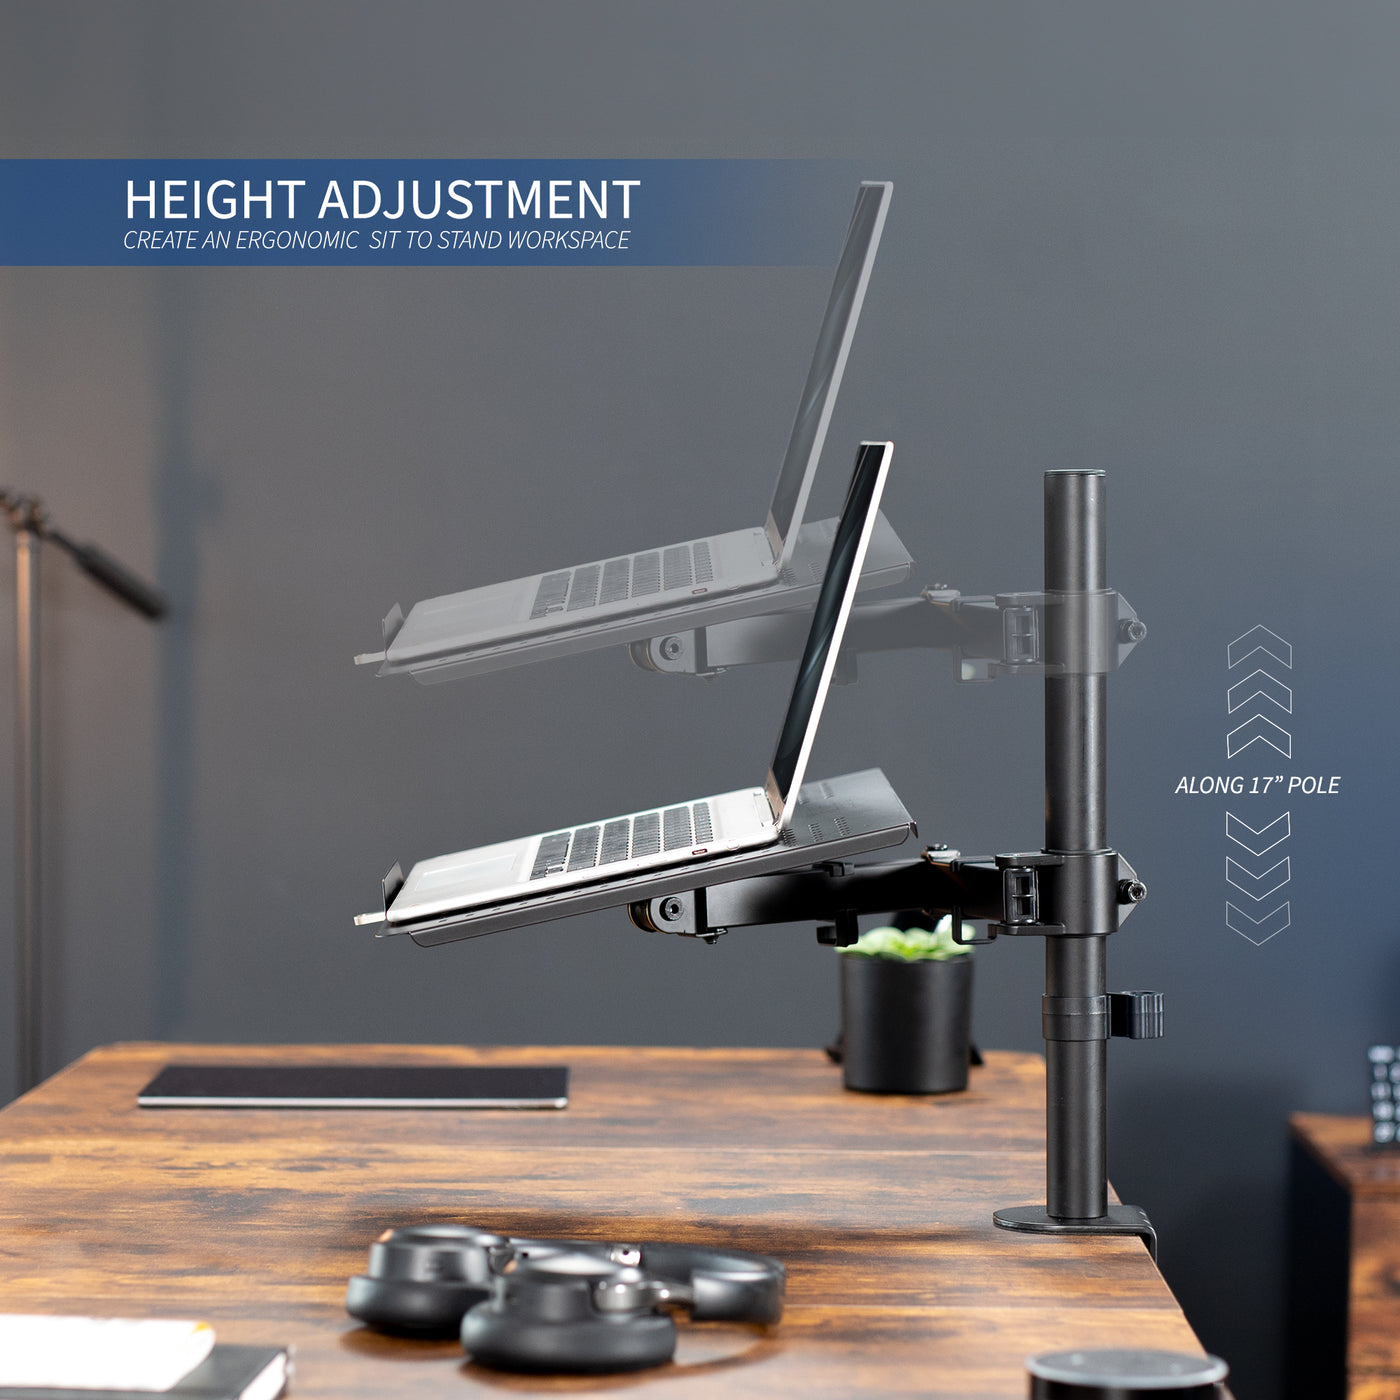 Laptop Tray and Desk Mount with USB